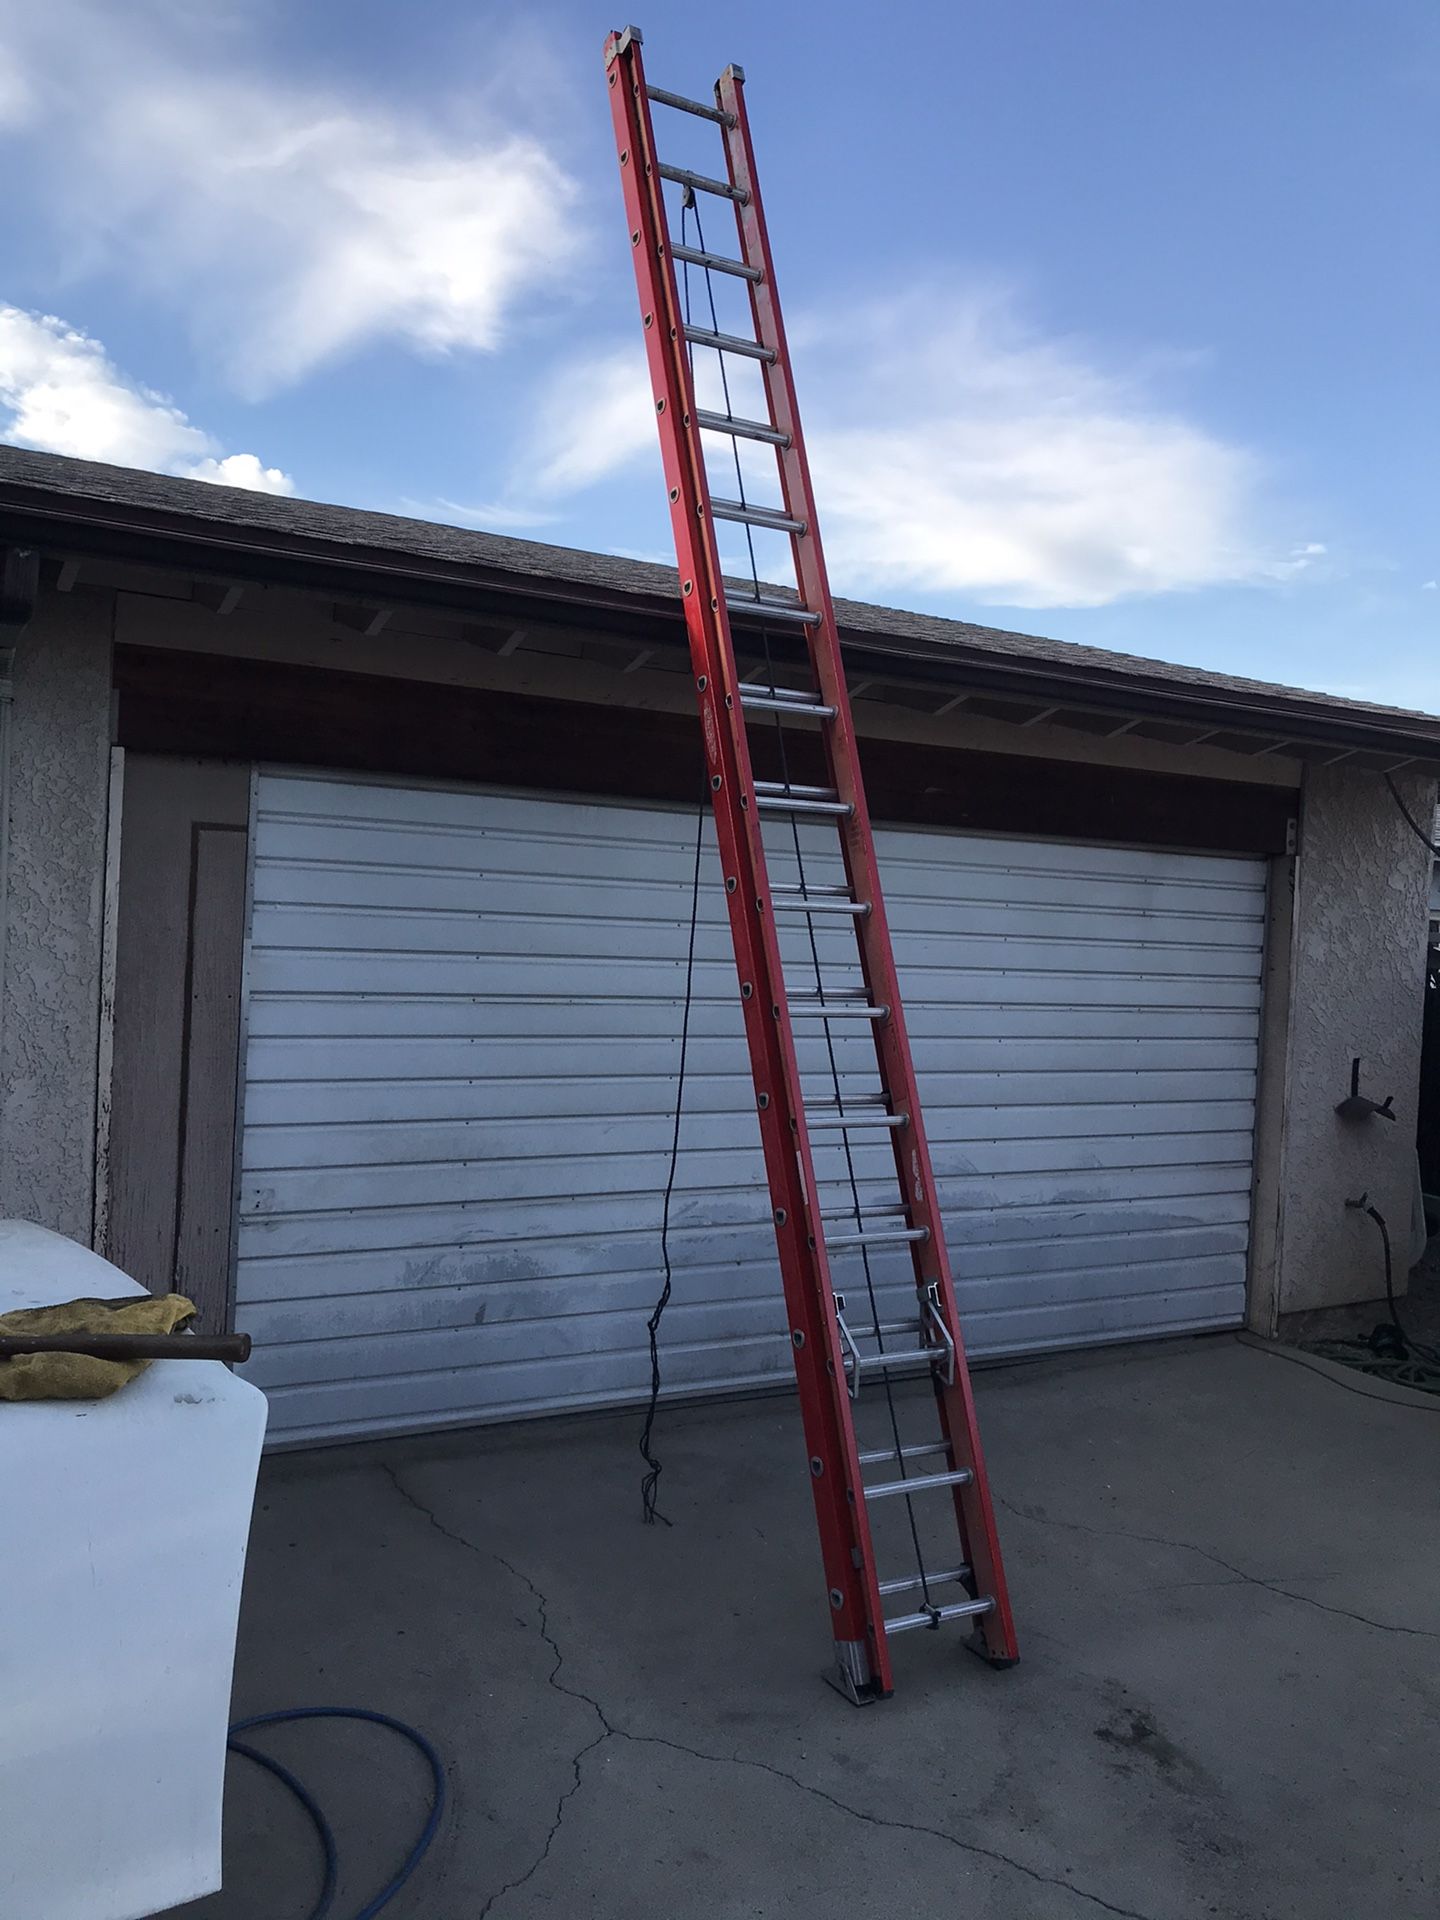 Werner fiberglass 32’ extension ladder 300 lbs rated escalera 32 pies foot feet good condition $$240 in Ontario 91762